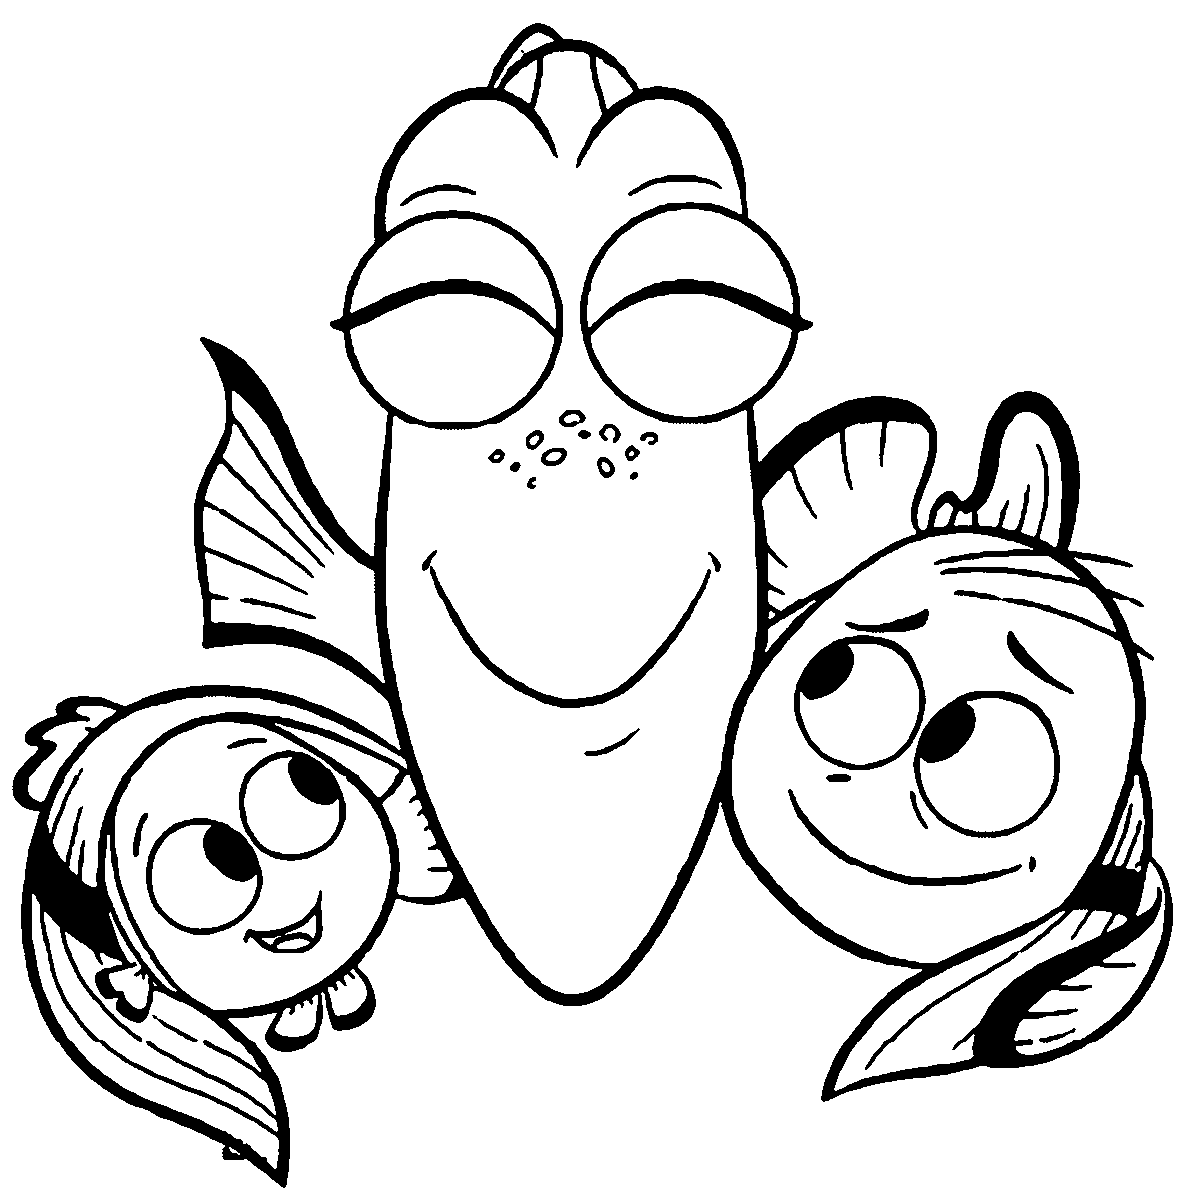 Dori Coloring Pages - Coloring Home